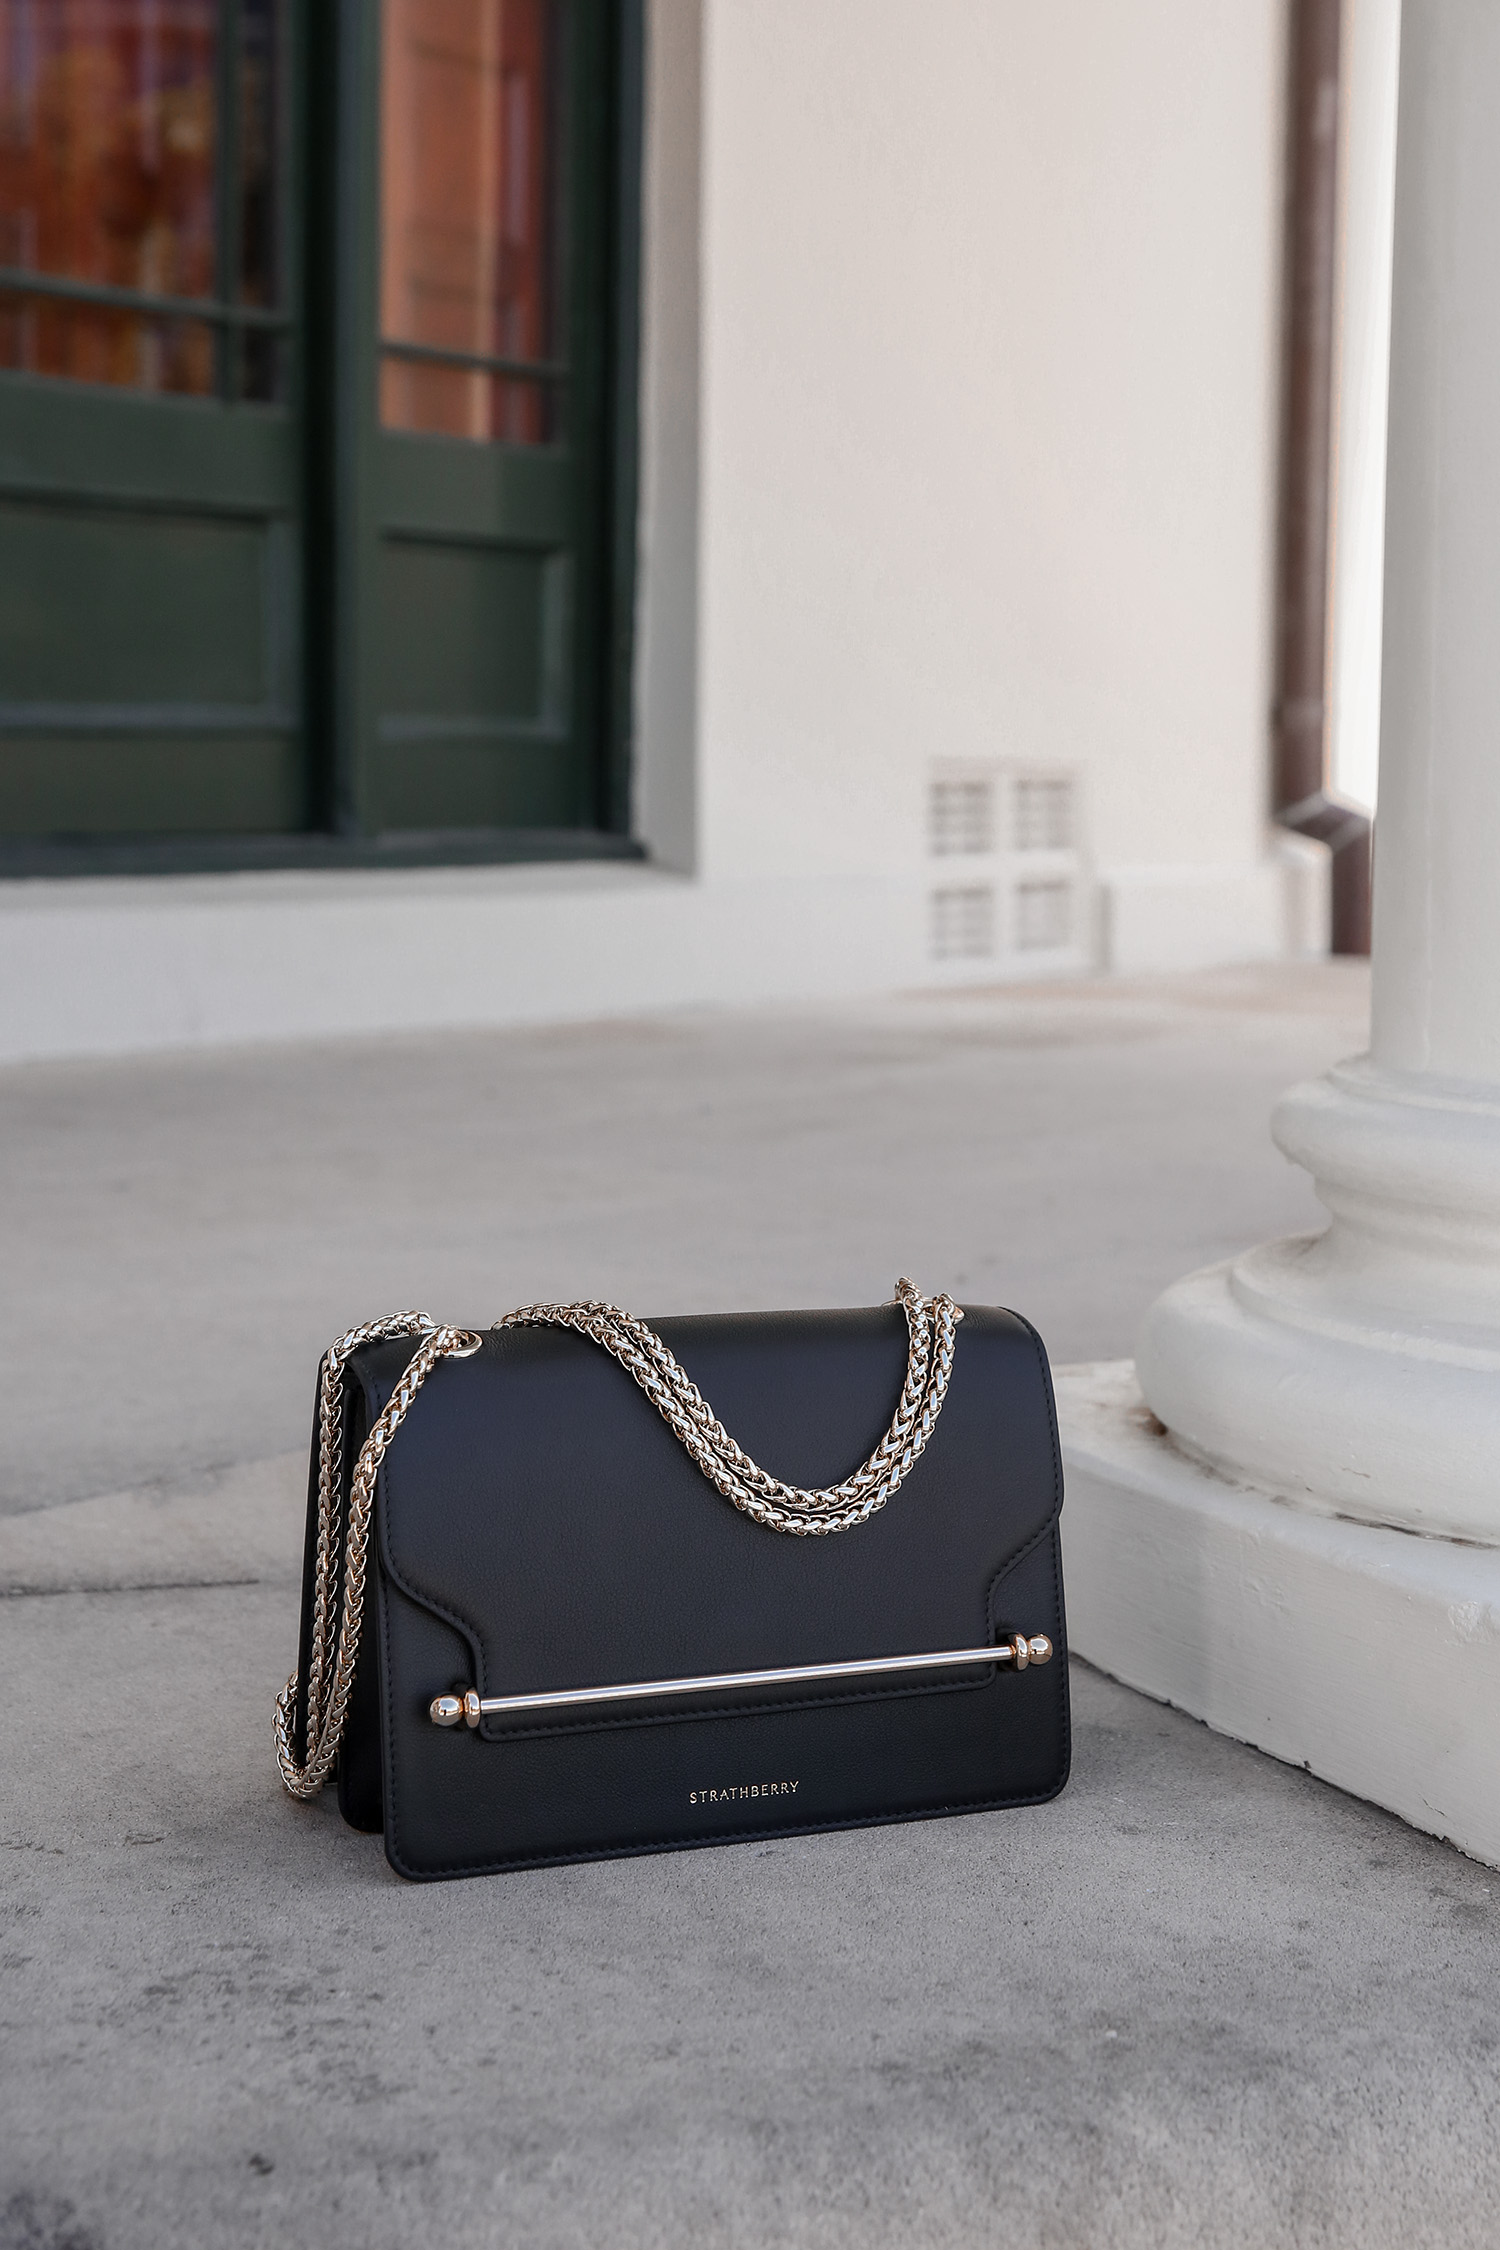 Strathberry East West Bag in black